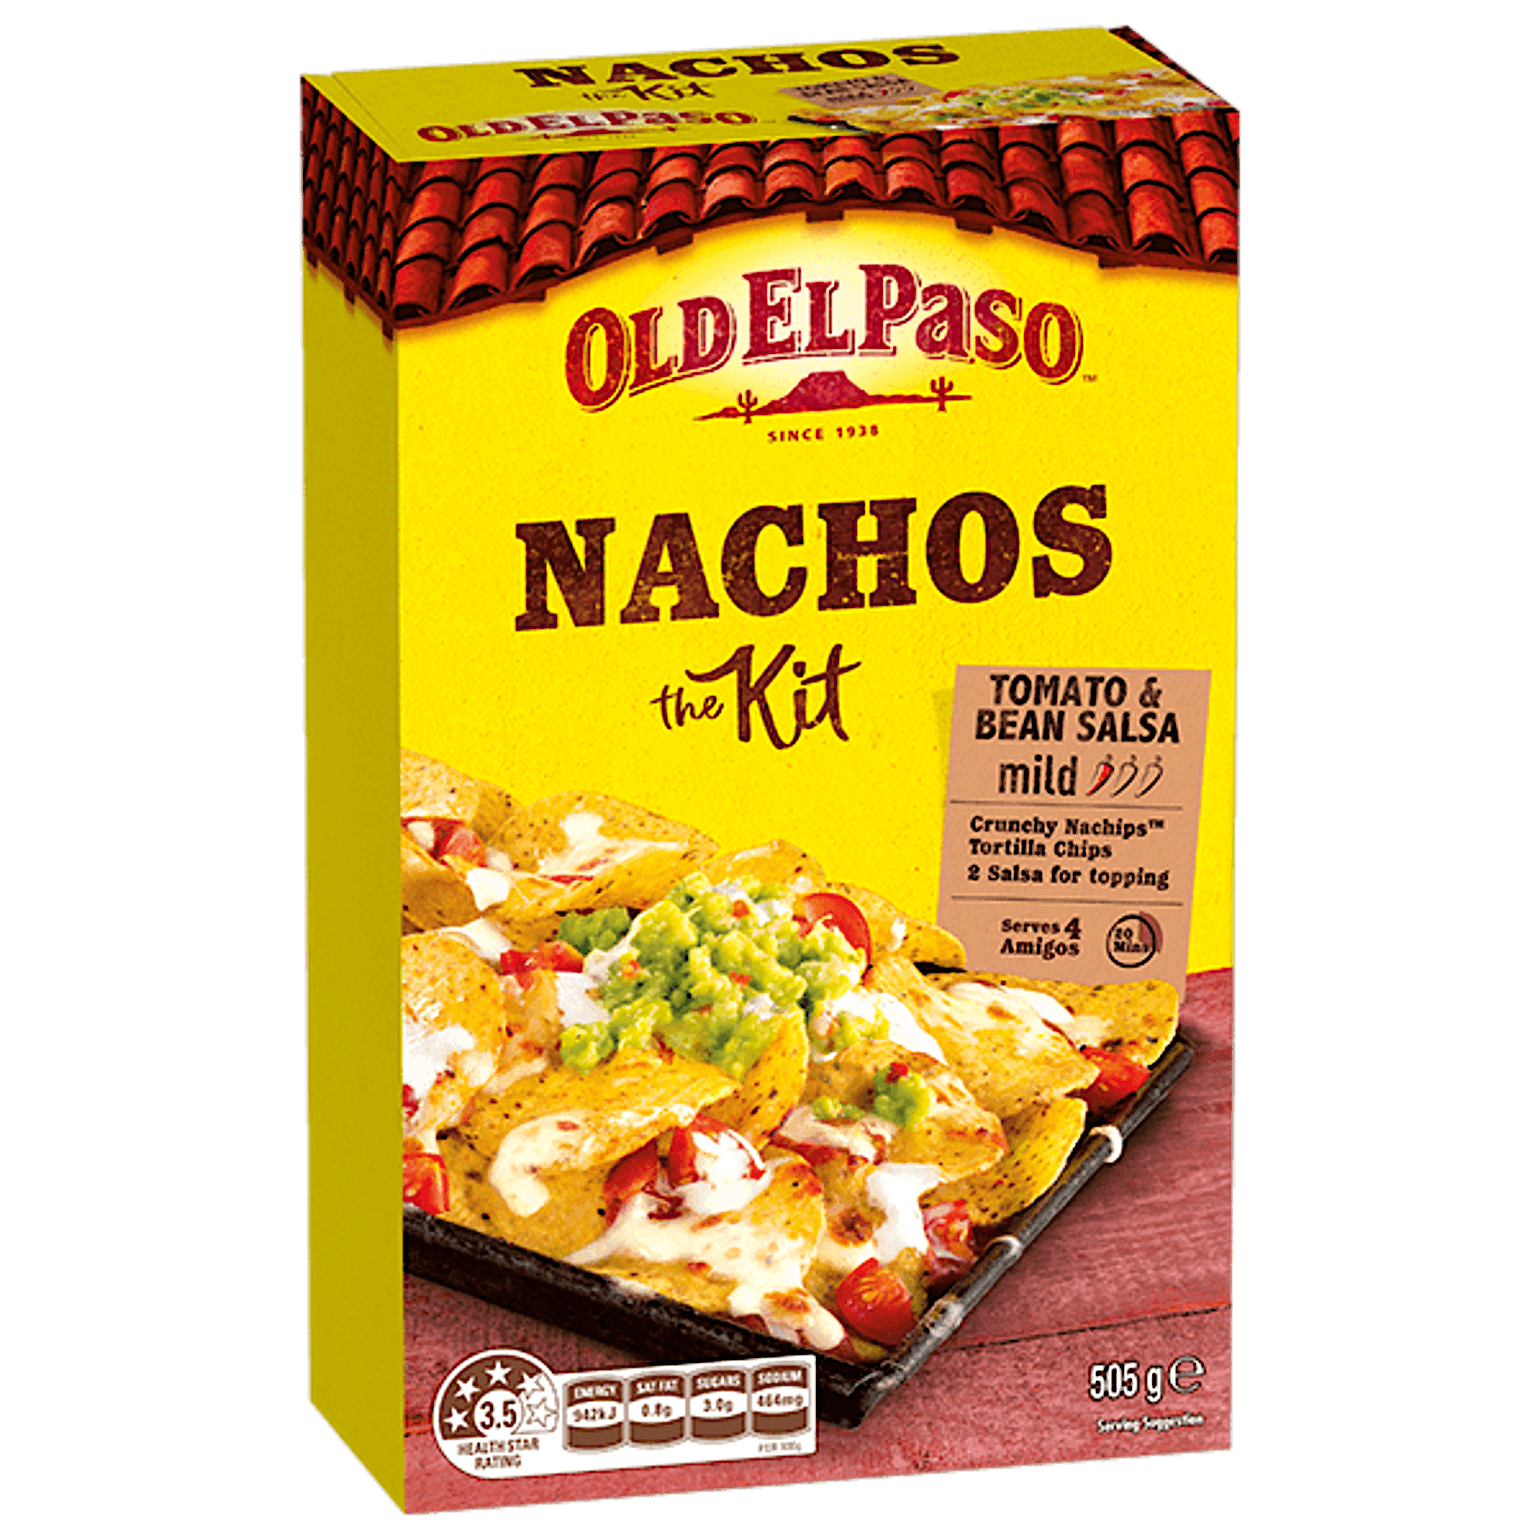 a pack of Old El Paso's mild tomato & bean salsa nachos kit containing nachips, tortilla chips & salsa for topping (505g)